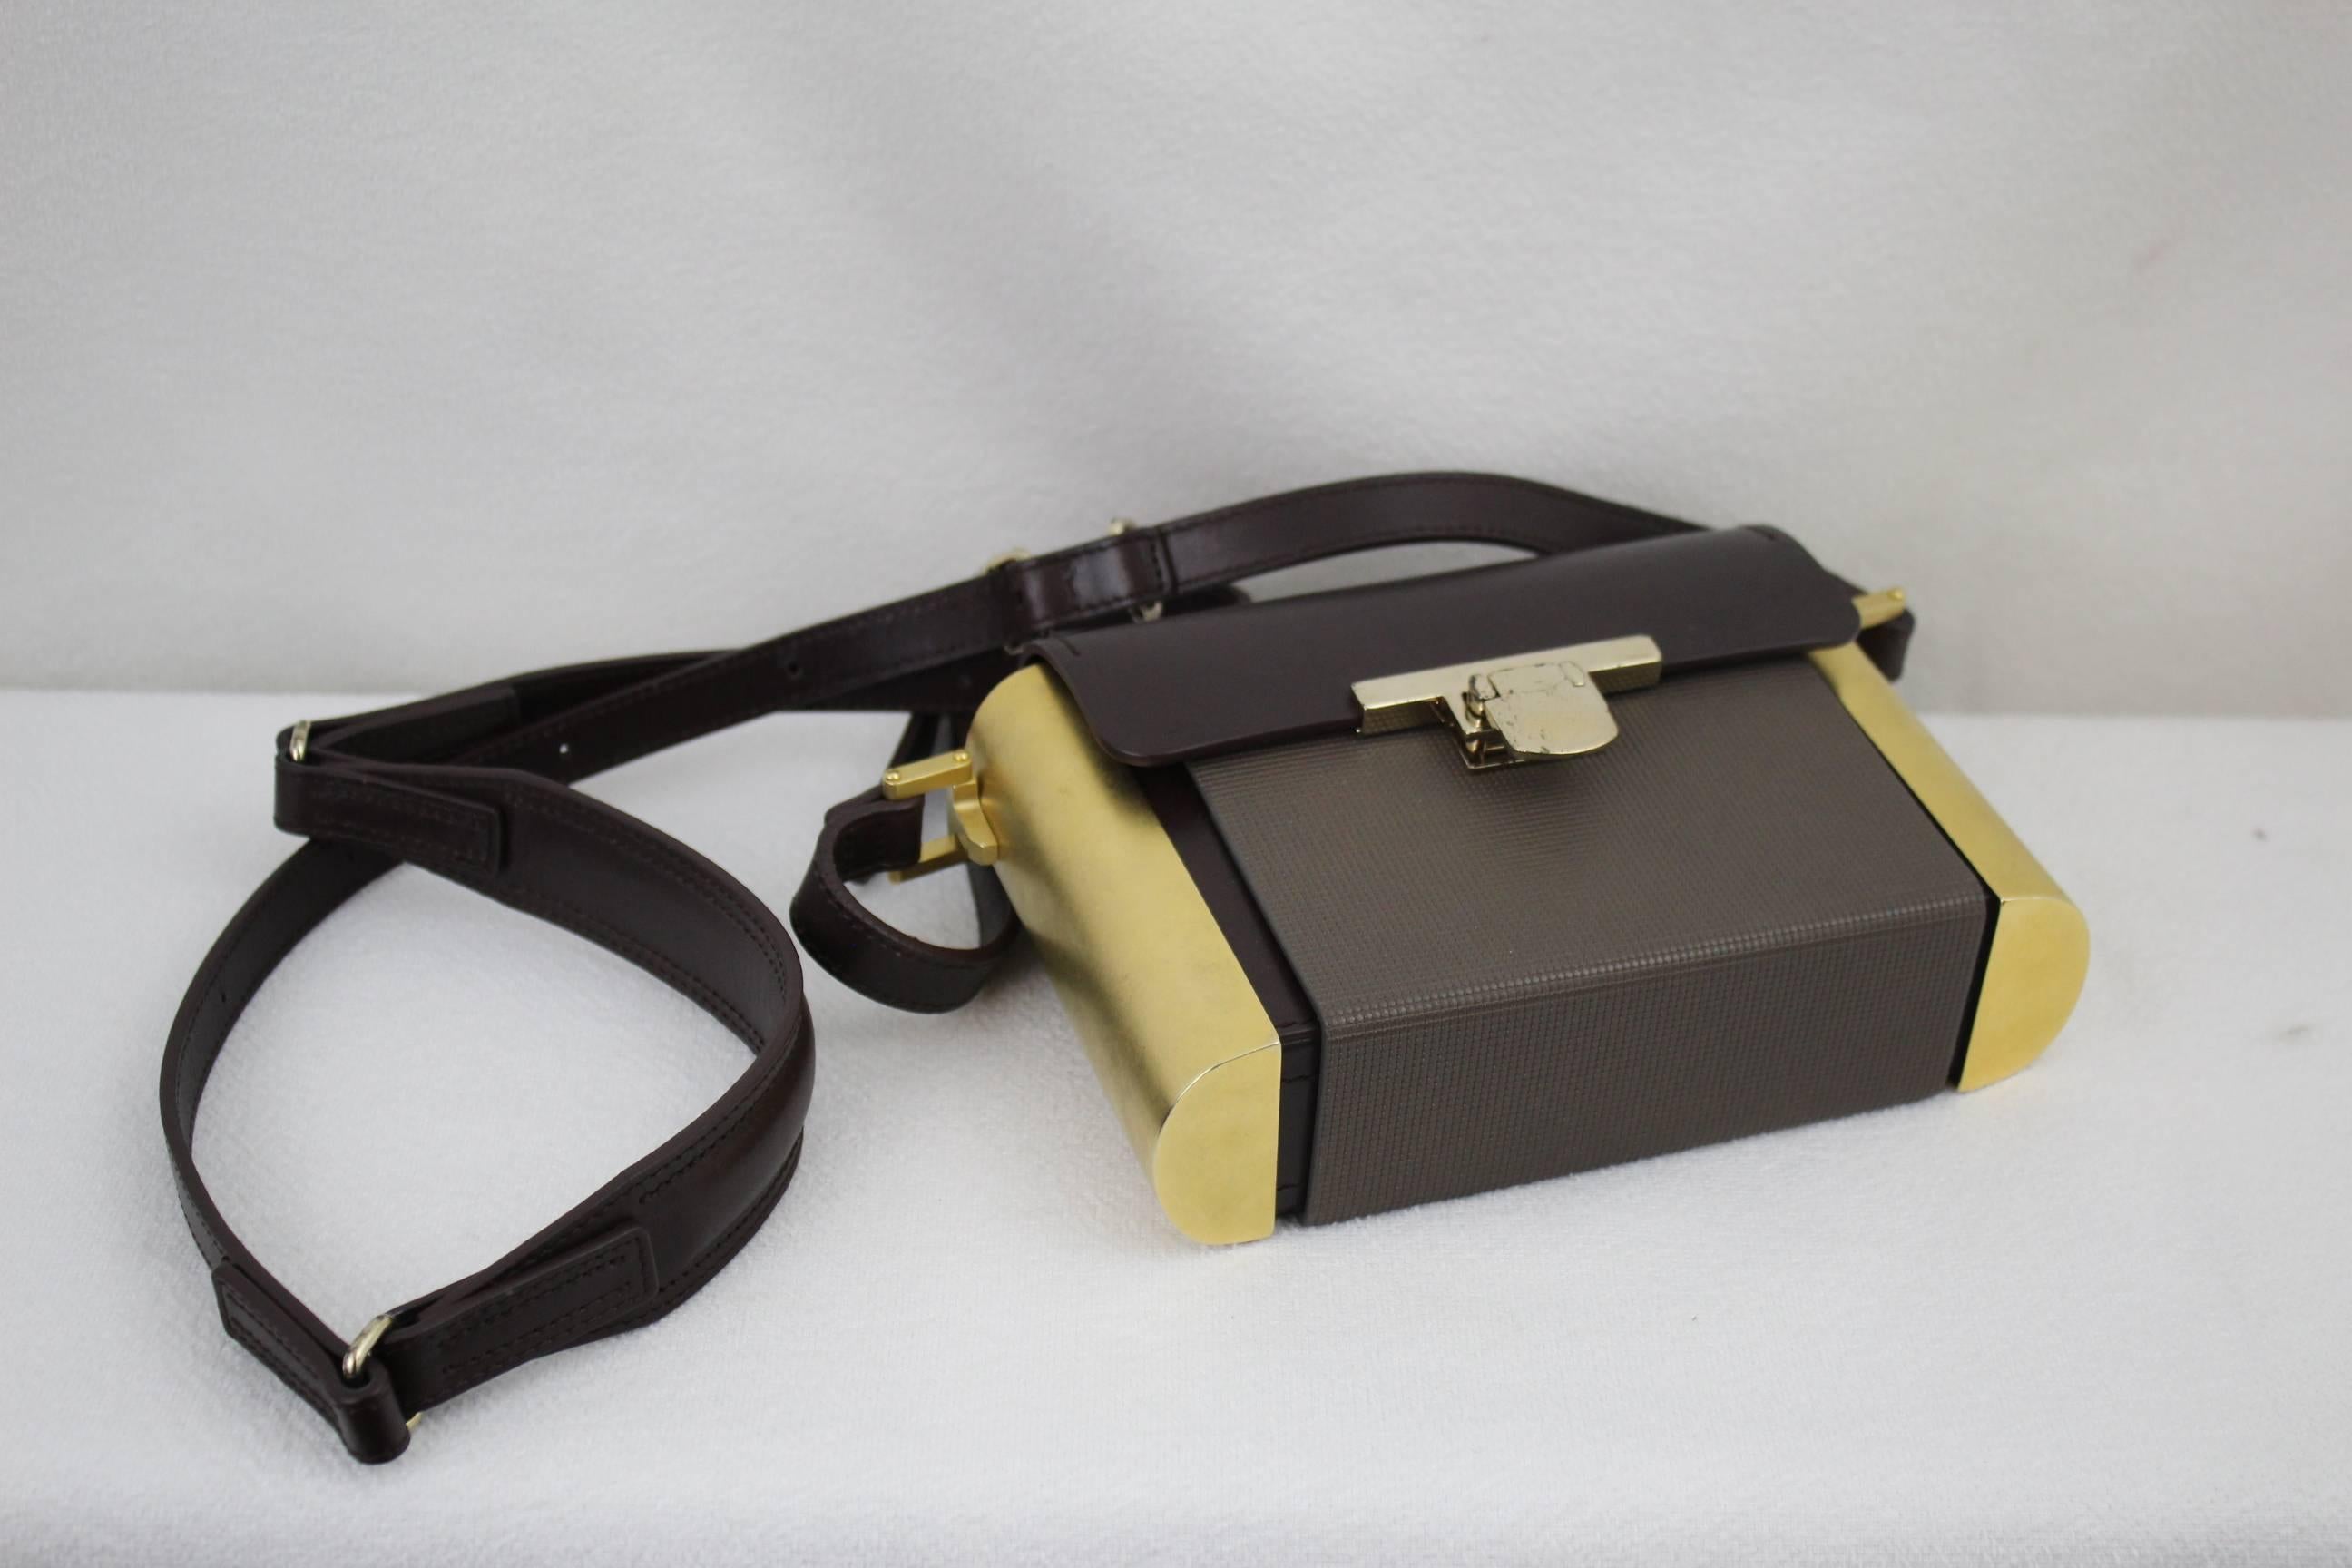 rare Lanvin bal in leather and metalic parts , style cartouchiere bag.

Good condition however the clasp presents some signs of use and storage.

Size 7 x  5 inches
